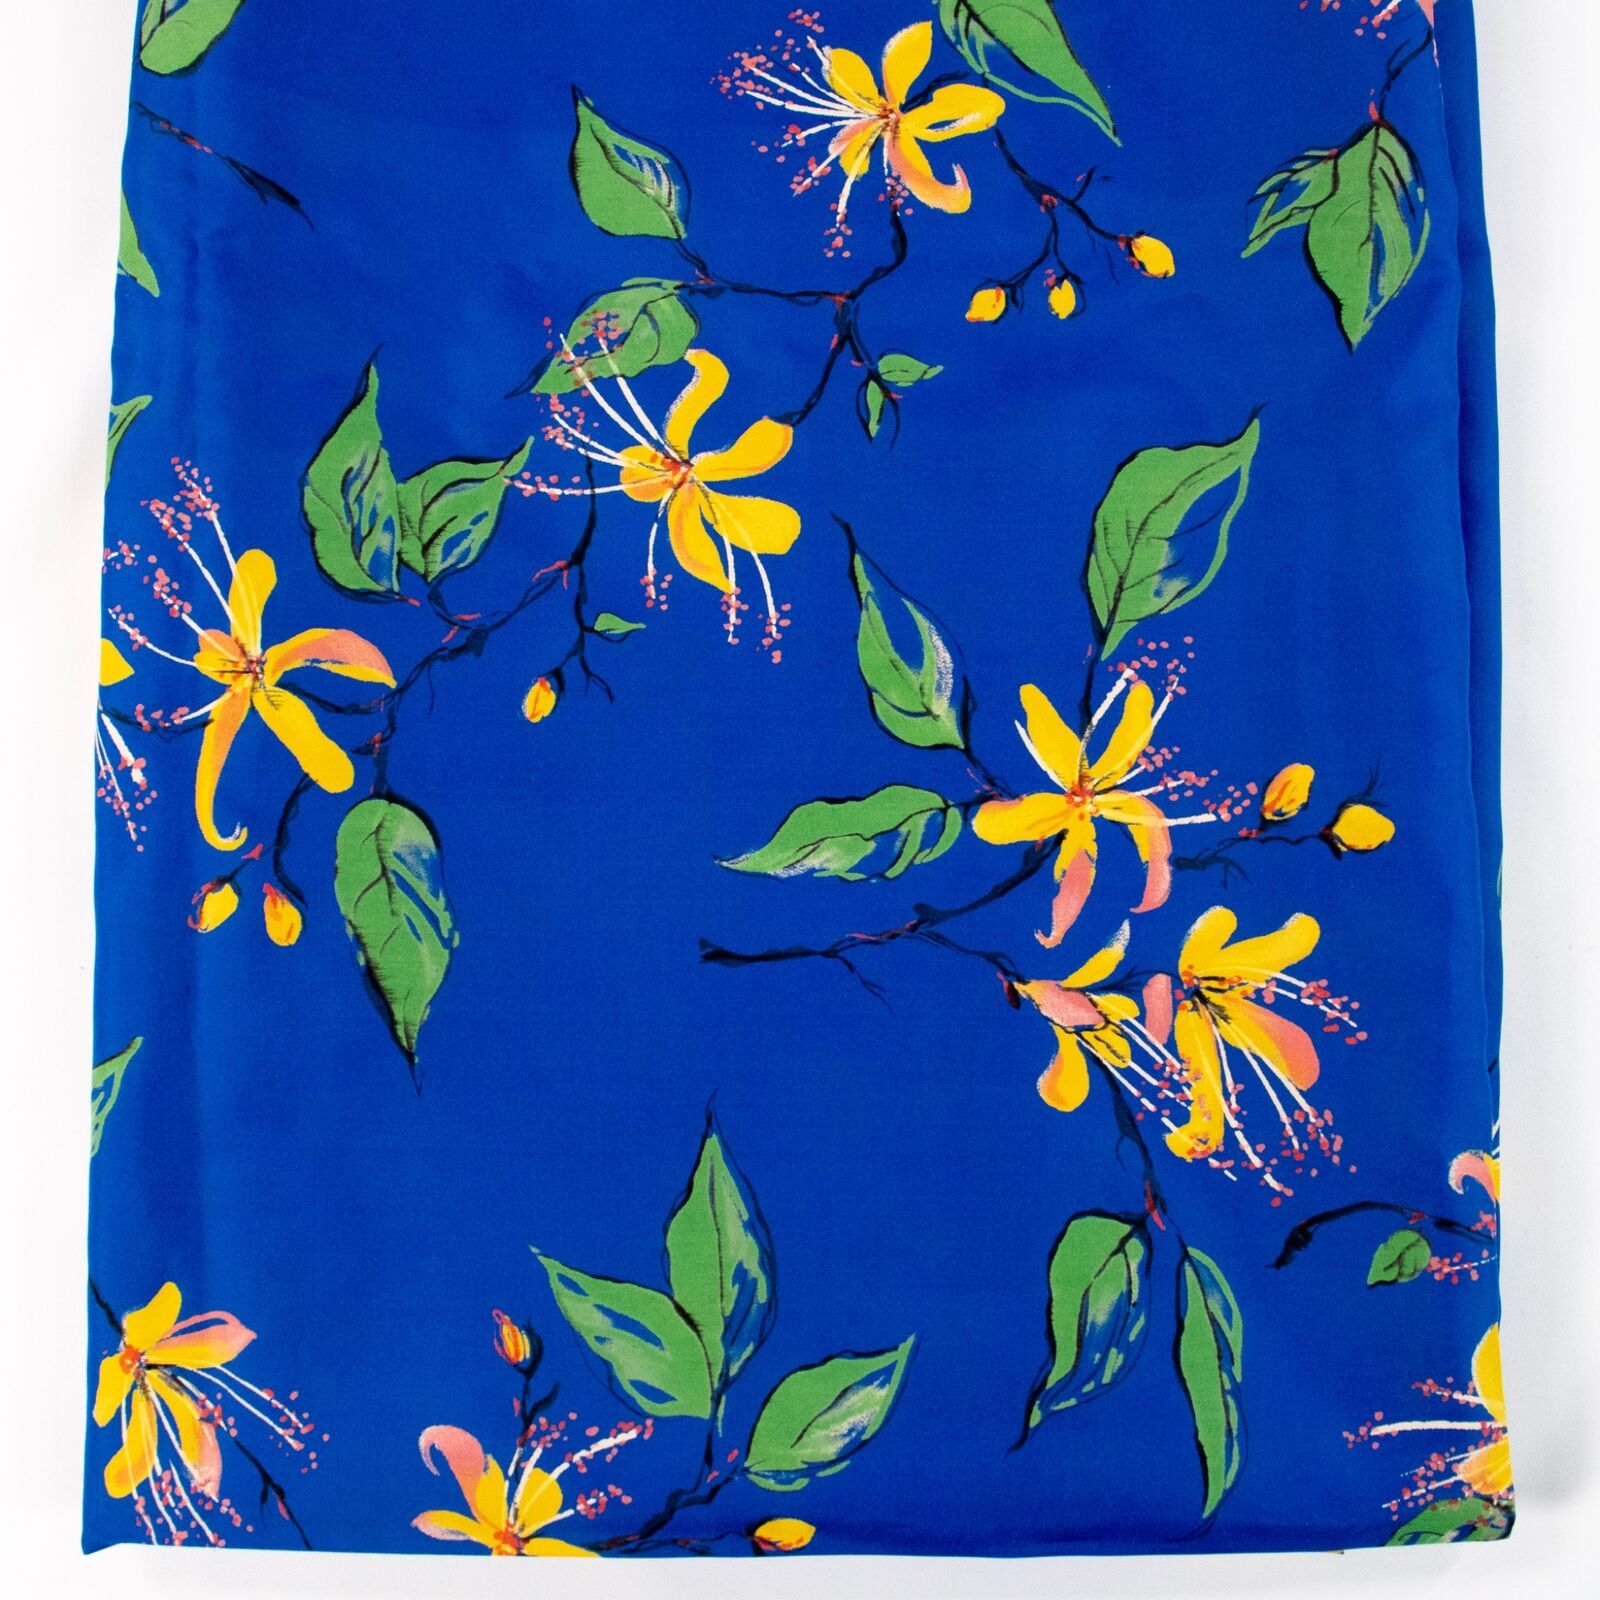 Vintage Dressmaking Fabric 1970s Yellow Flowers on Blue Stylized Floral 45x94